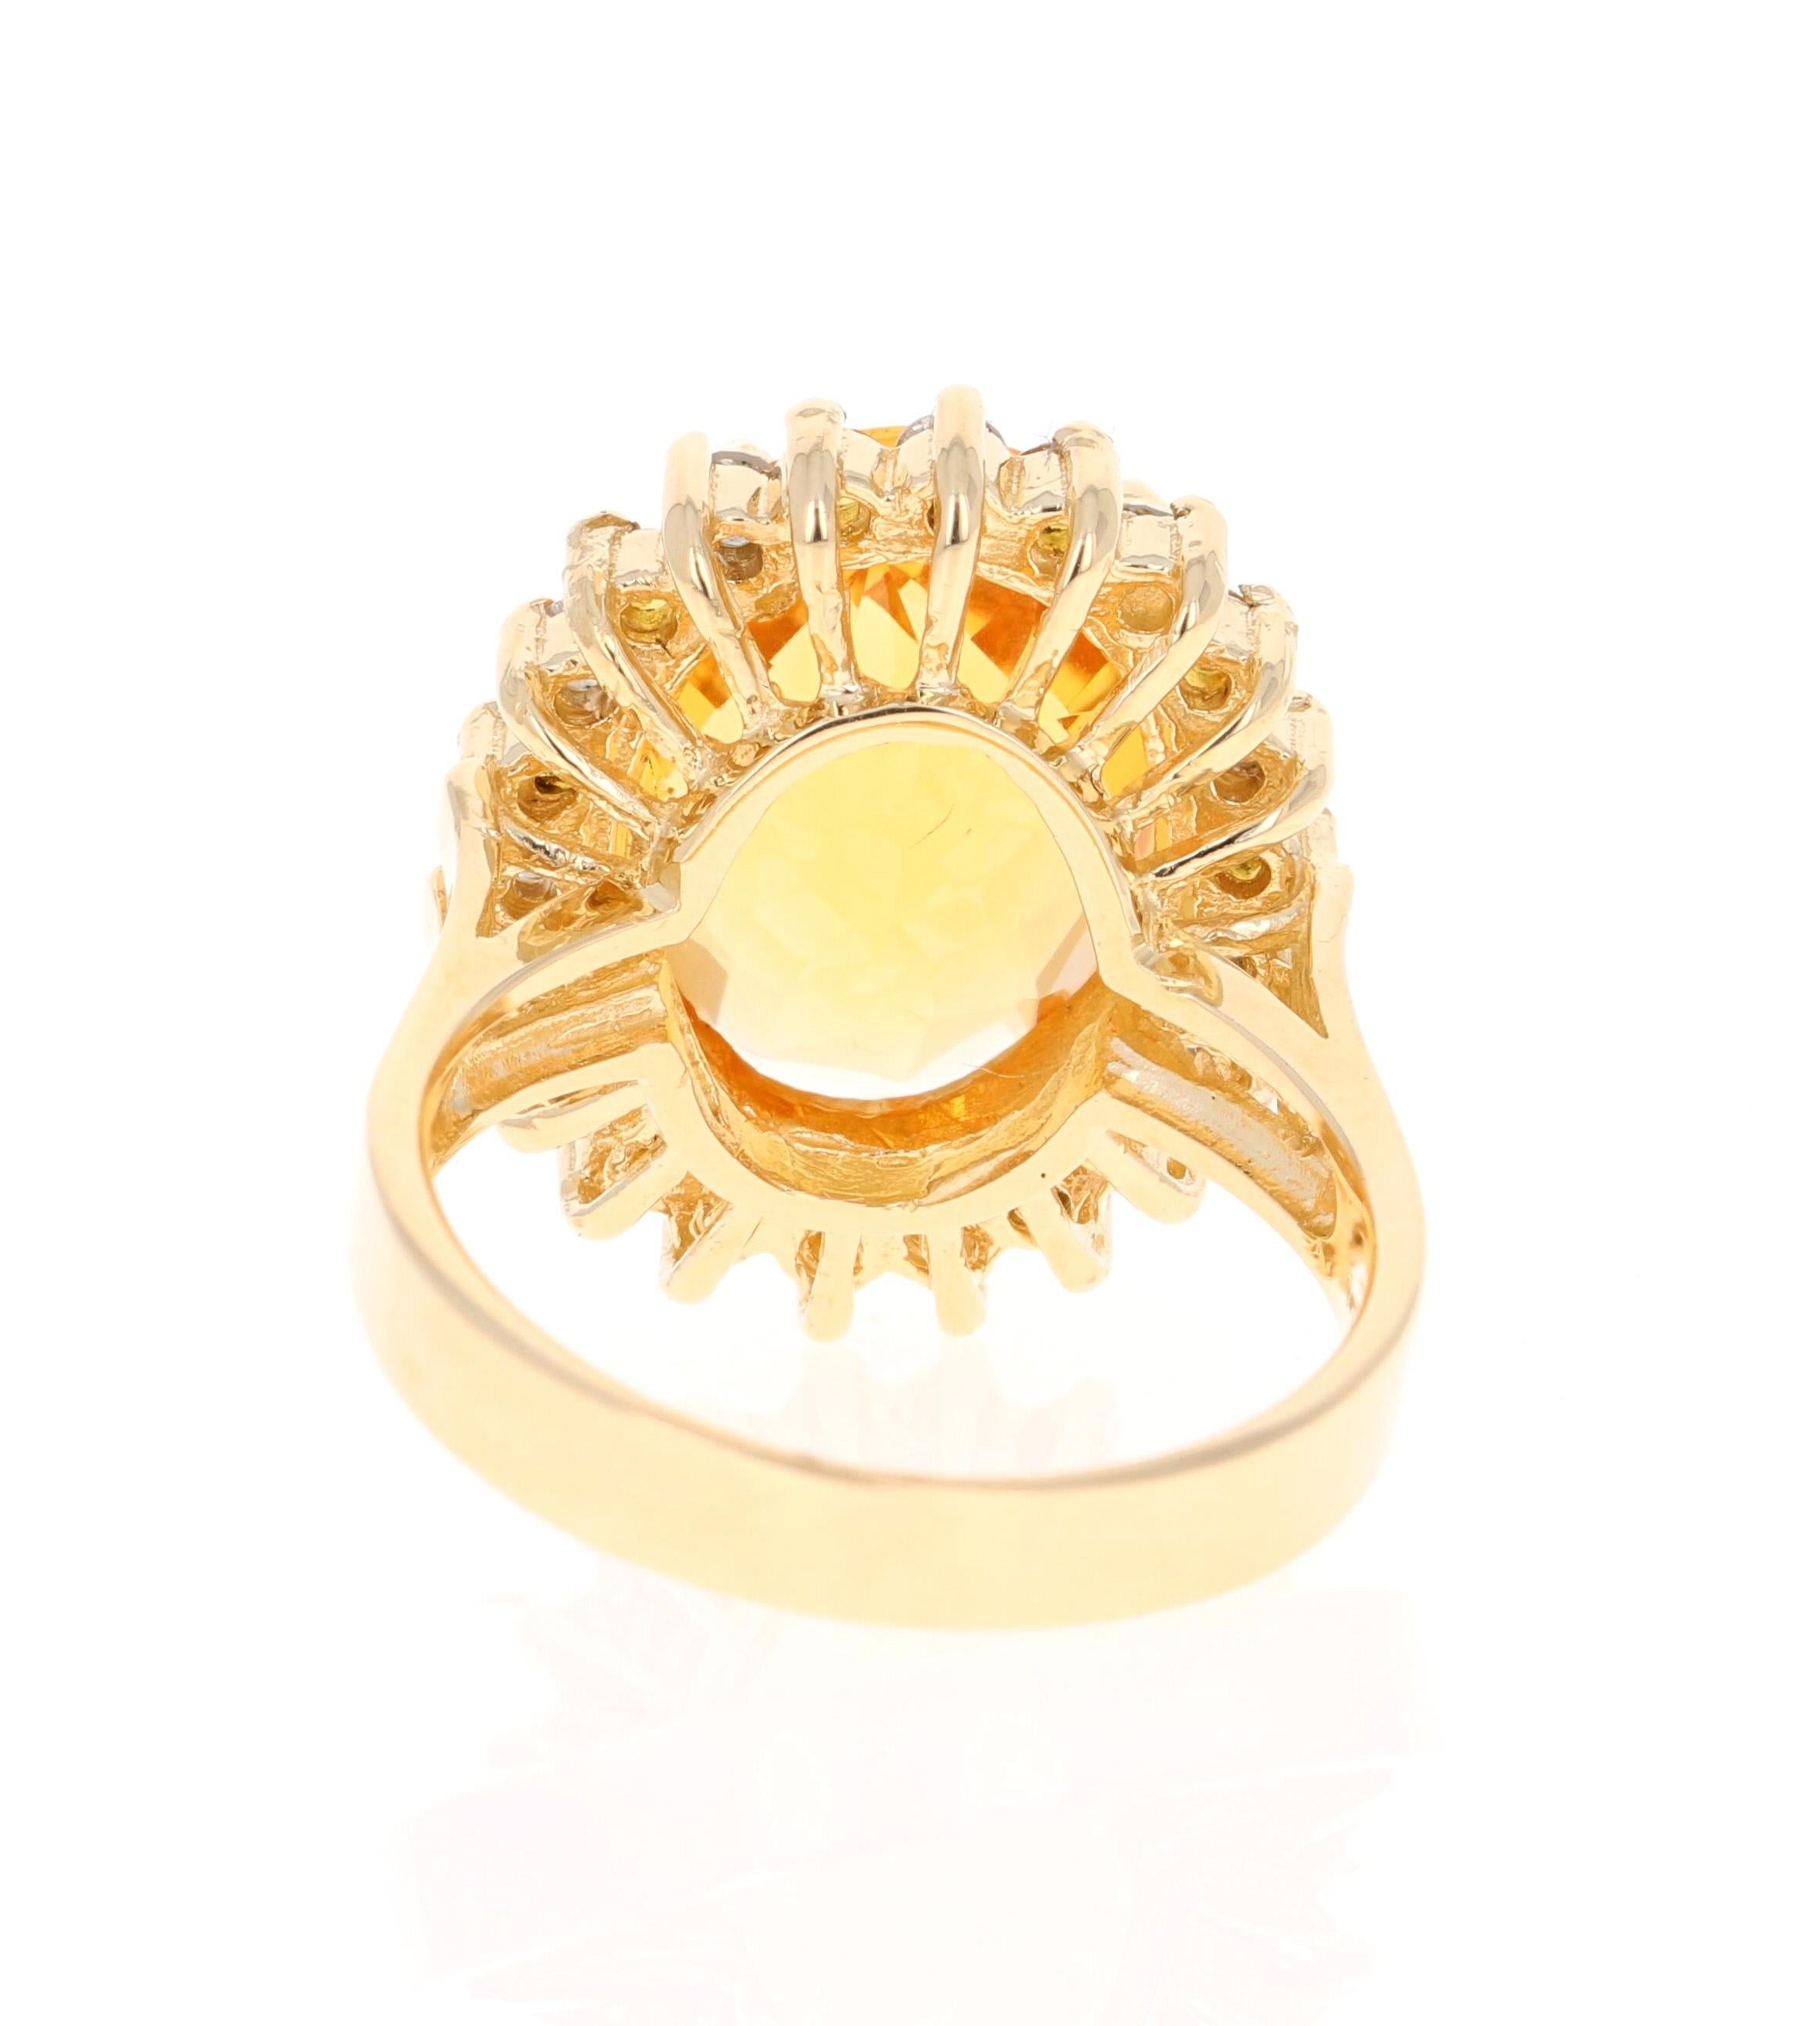 Oval Cut 8.74 Carat Citrine Diamond Yellow Gold Cocktail Ring For Sale